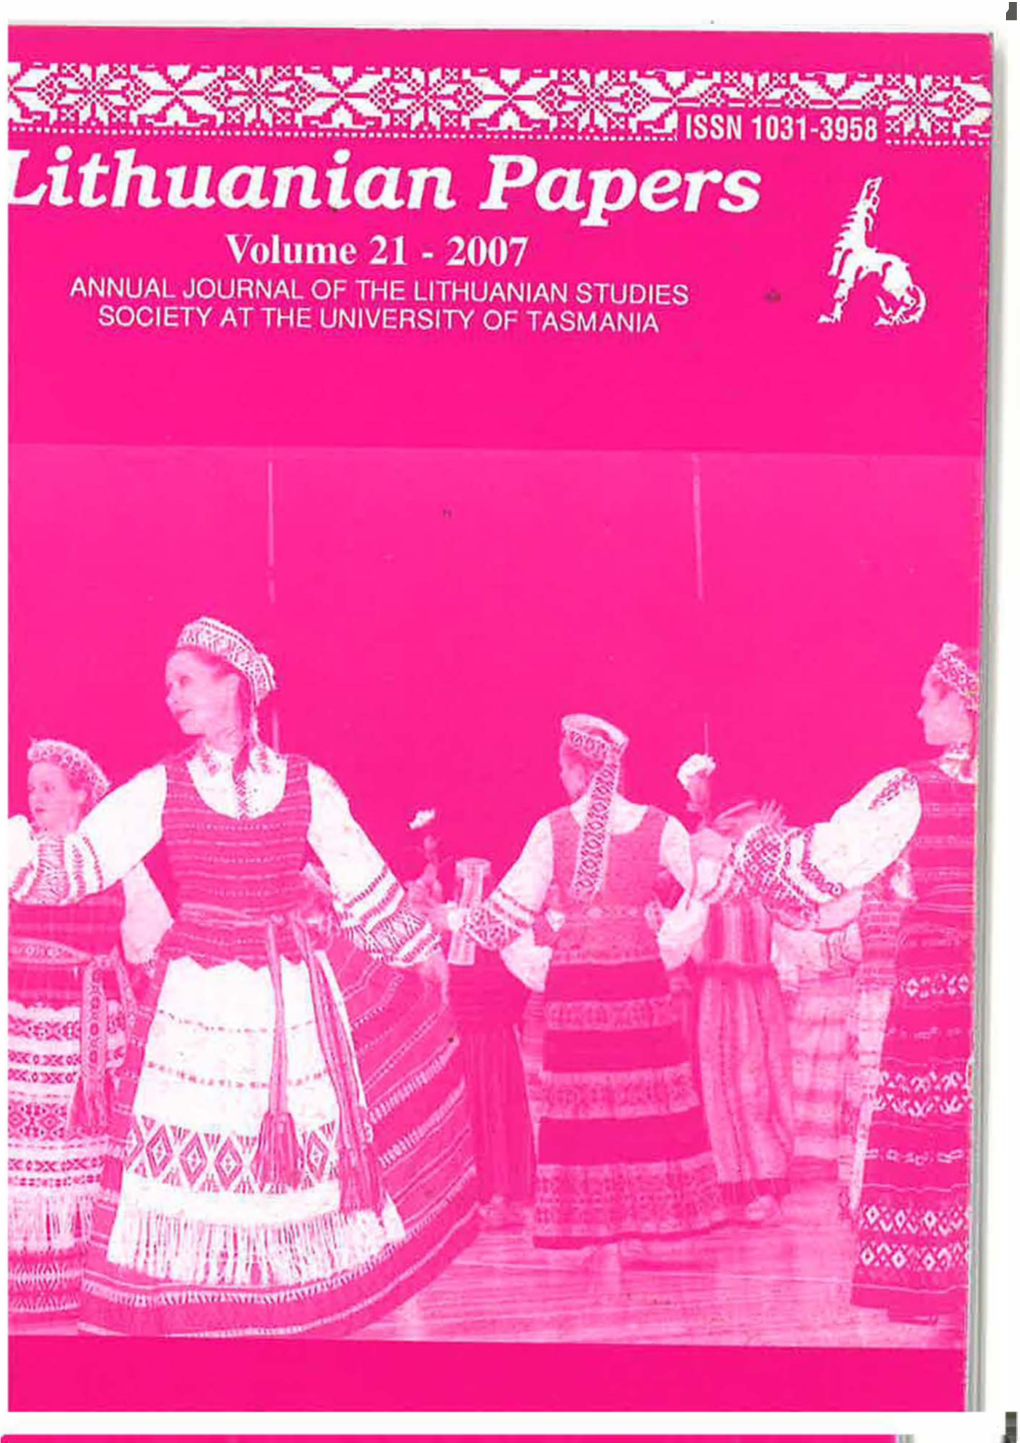 Lithuanian-Papers-Vol-21-2007.Pdf